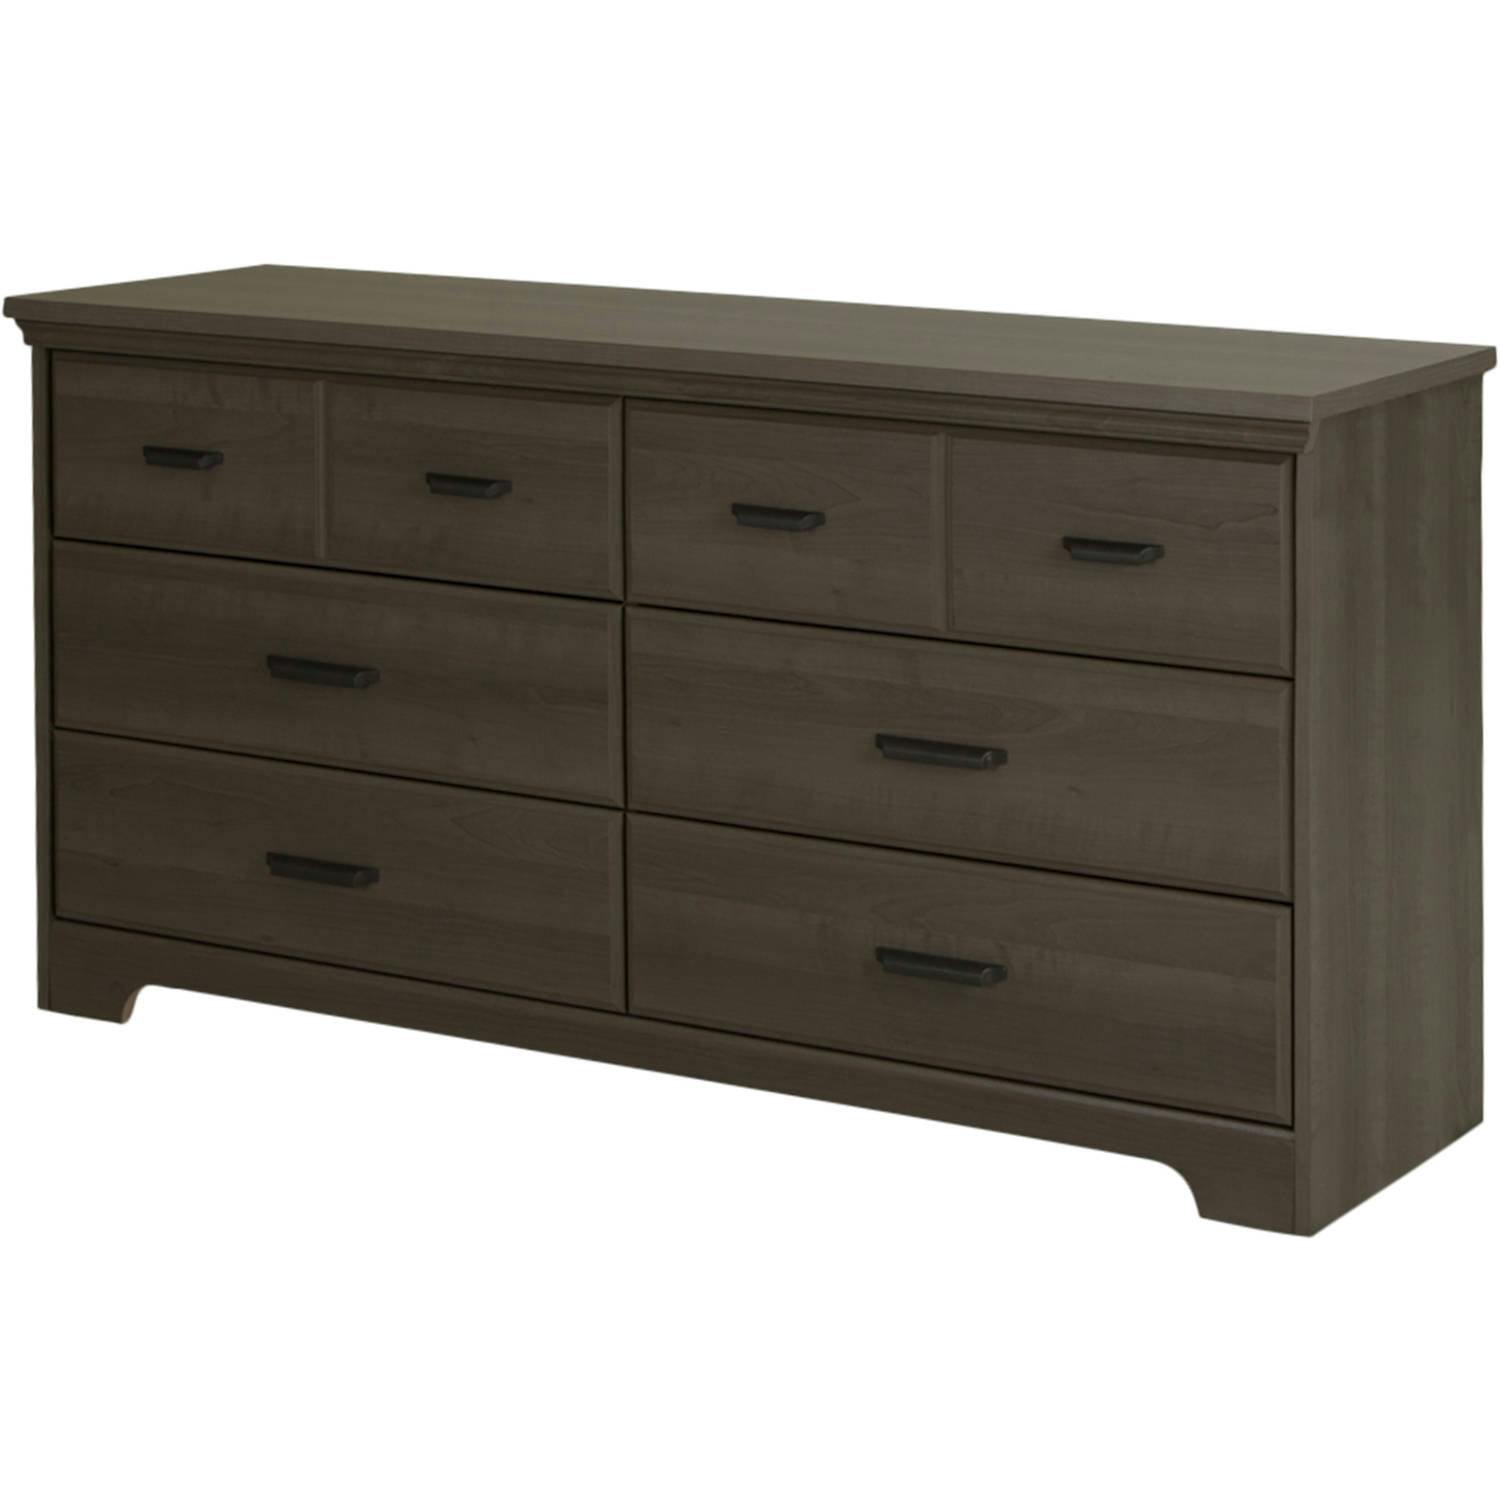 Cottage Charm Gray Maple 6-Drawer Double Dresser with Soft Close